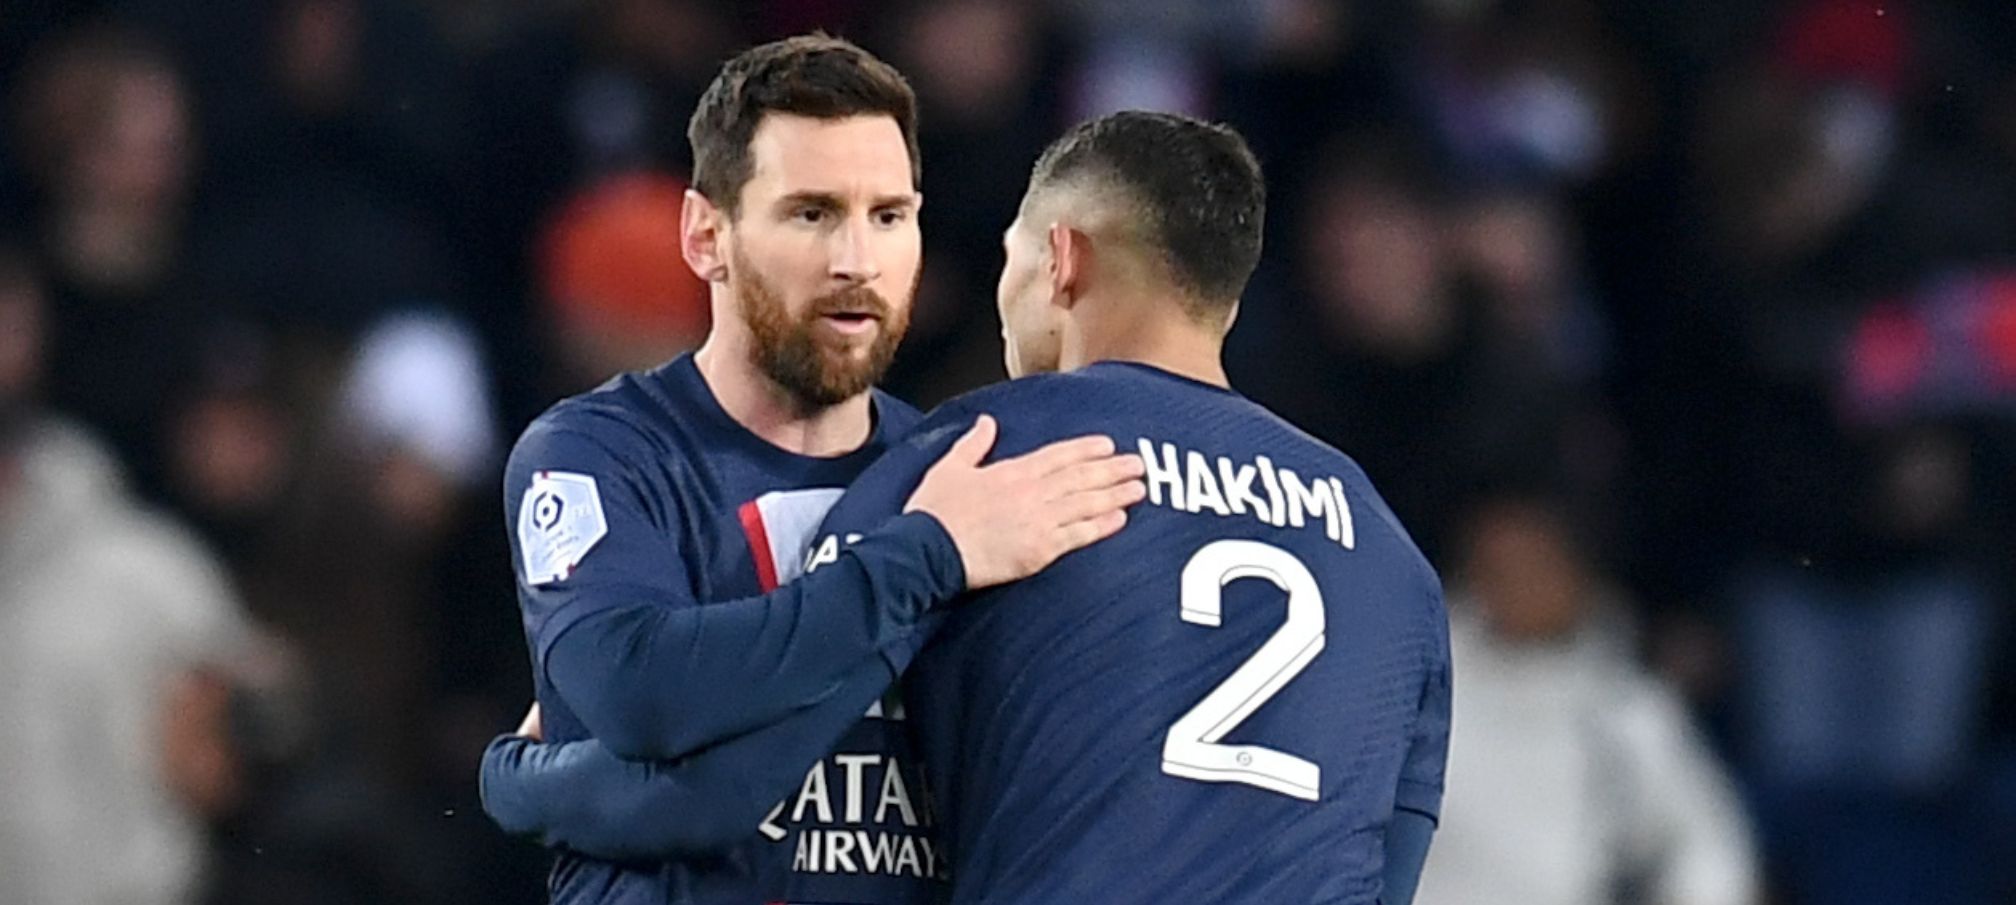 Messi and Hakimi score stunners in PSG win